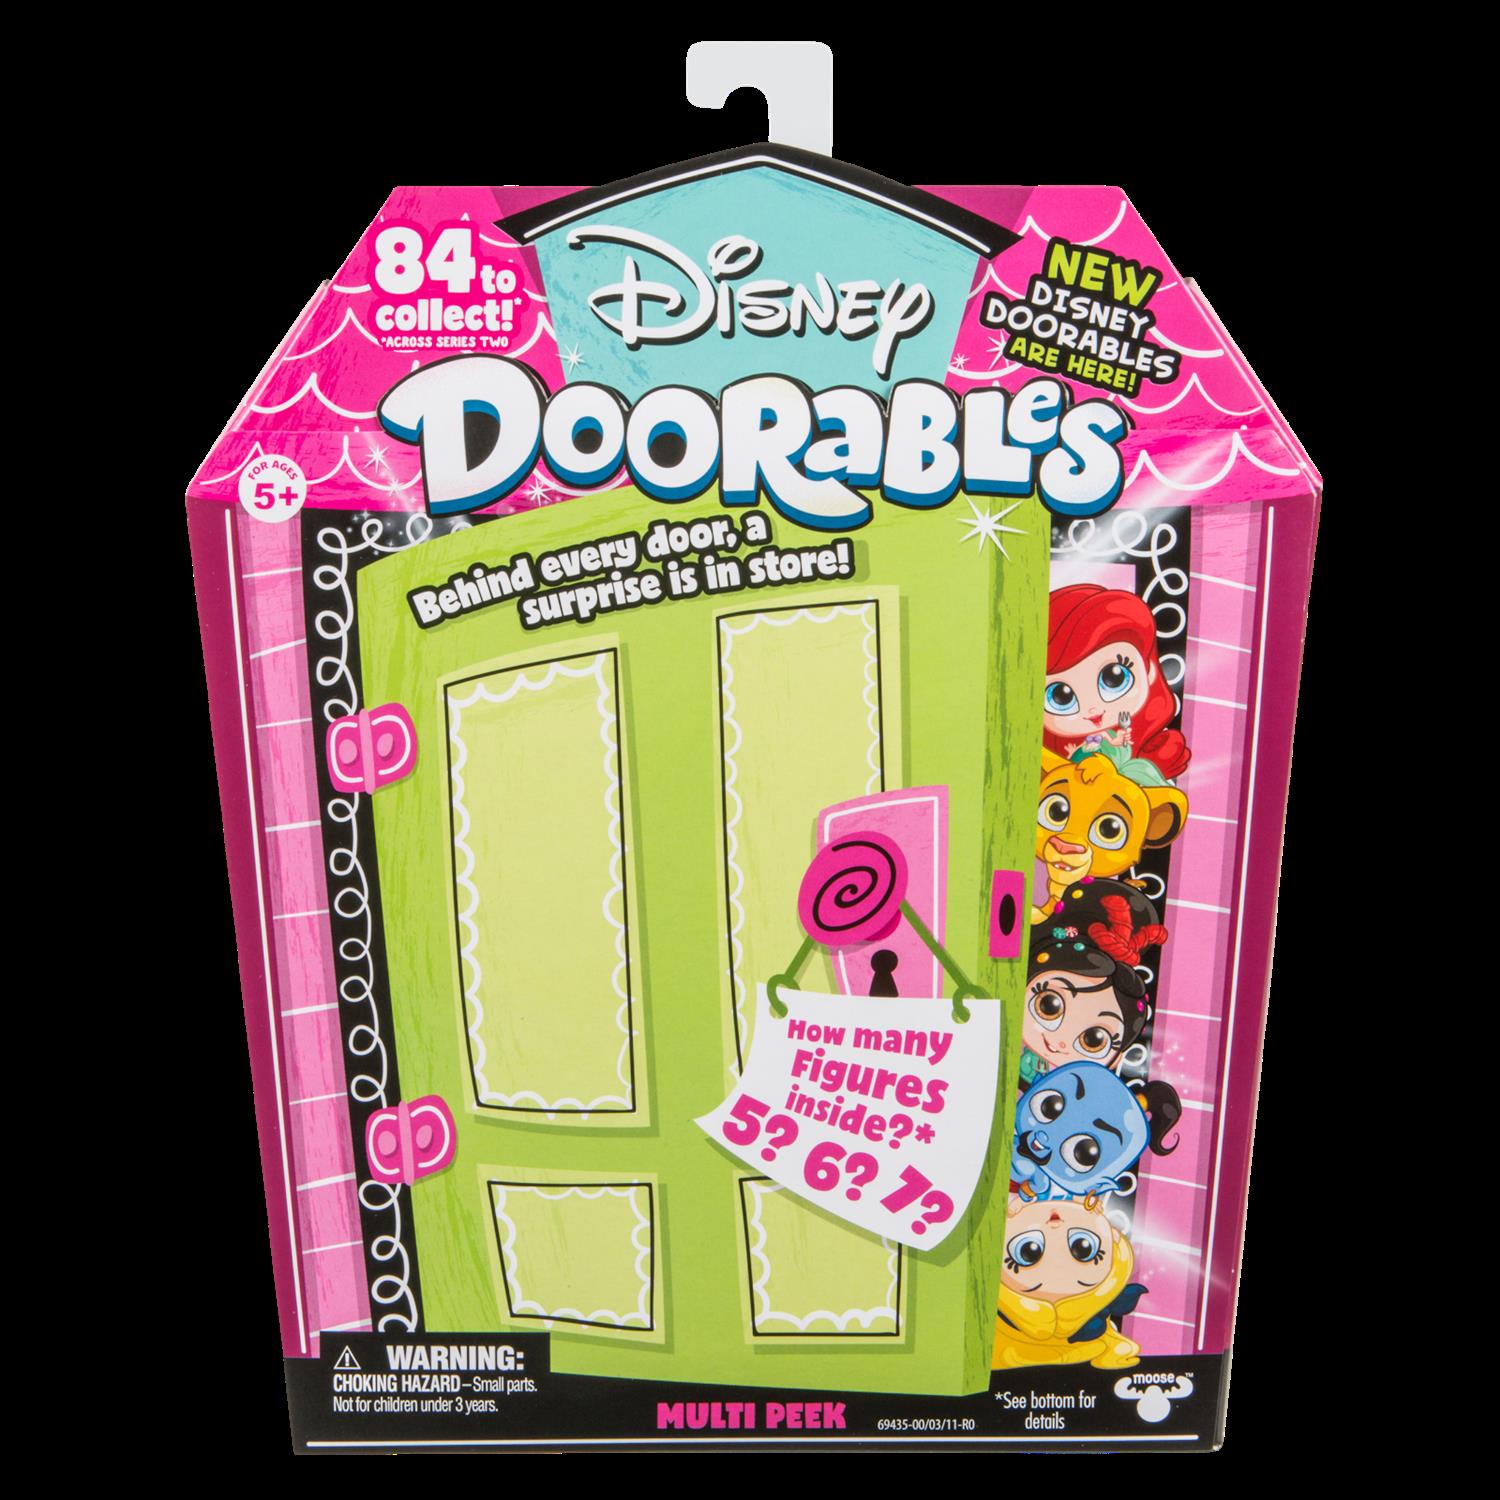 Disney Doorables Squish'alots Squish Machine and Collectible Blind Bag  Figures, Officially Licensed Kids Toys for Ages 5 Up by Just Play